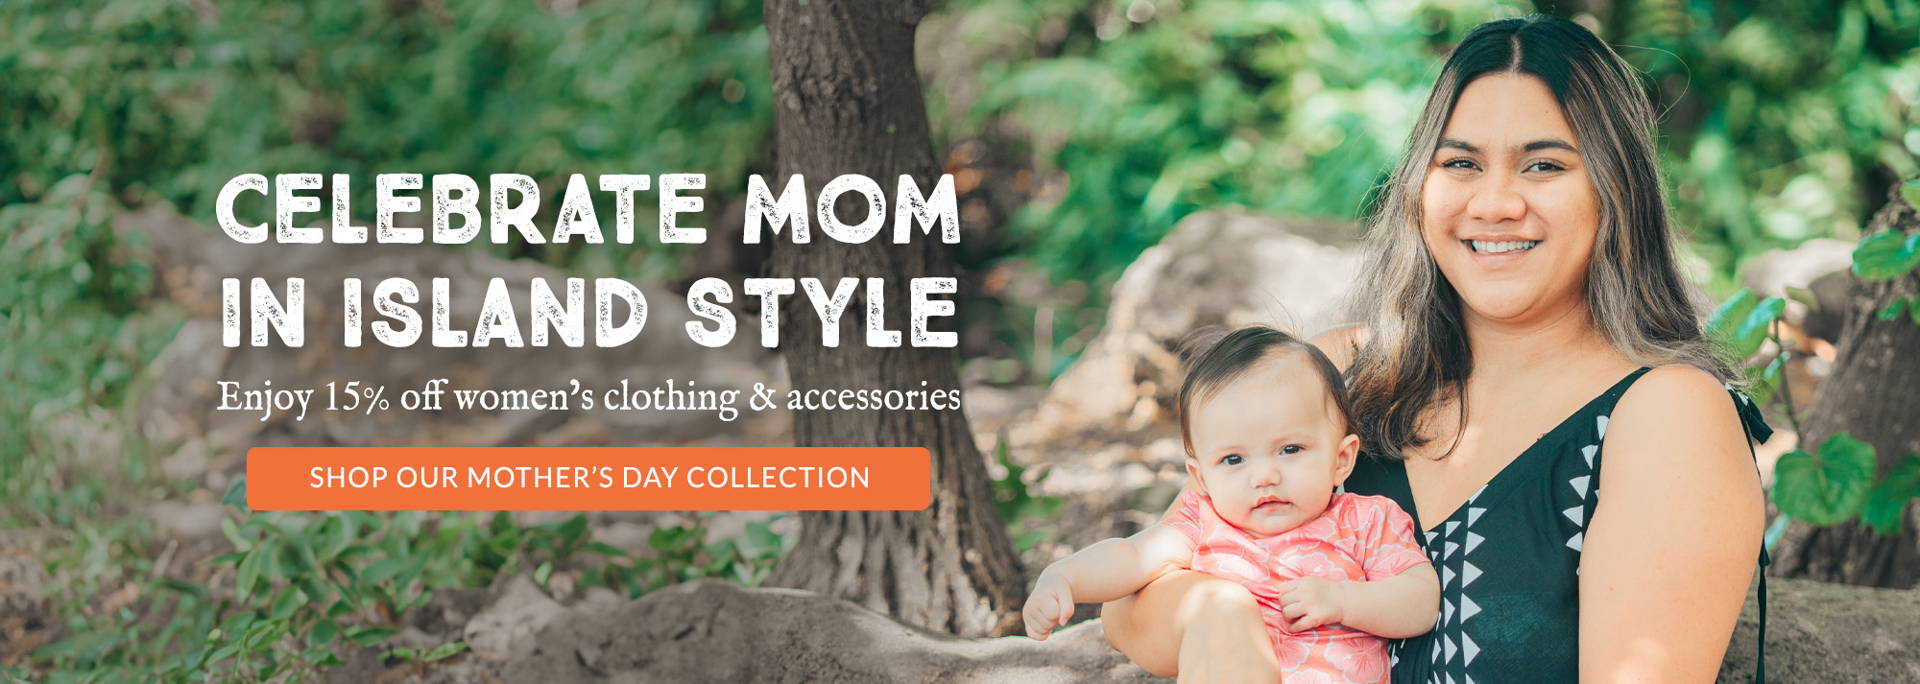 Shop our Mother's Day Collection for 15% Off Clothing & Accessories! Celebrate Mom in style!